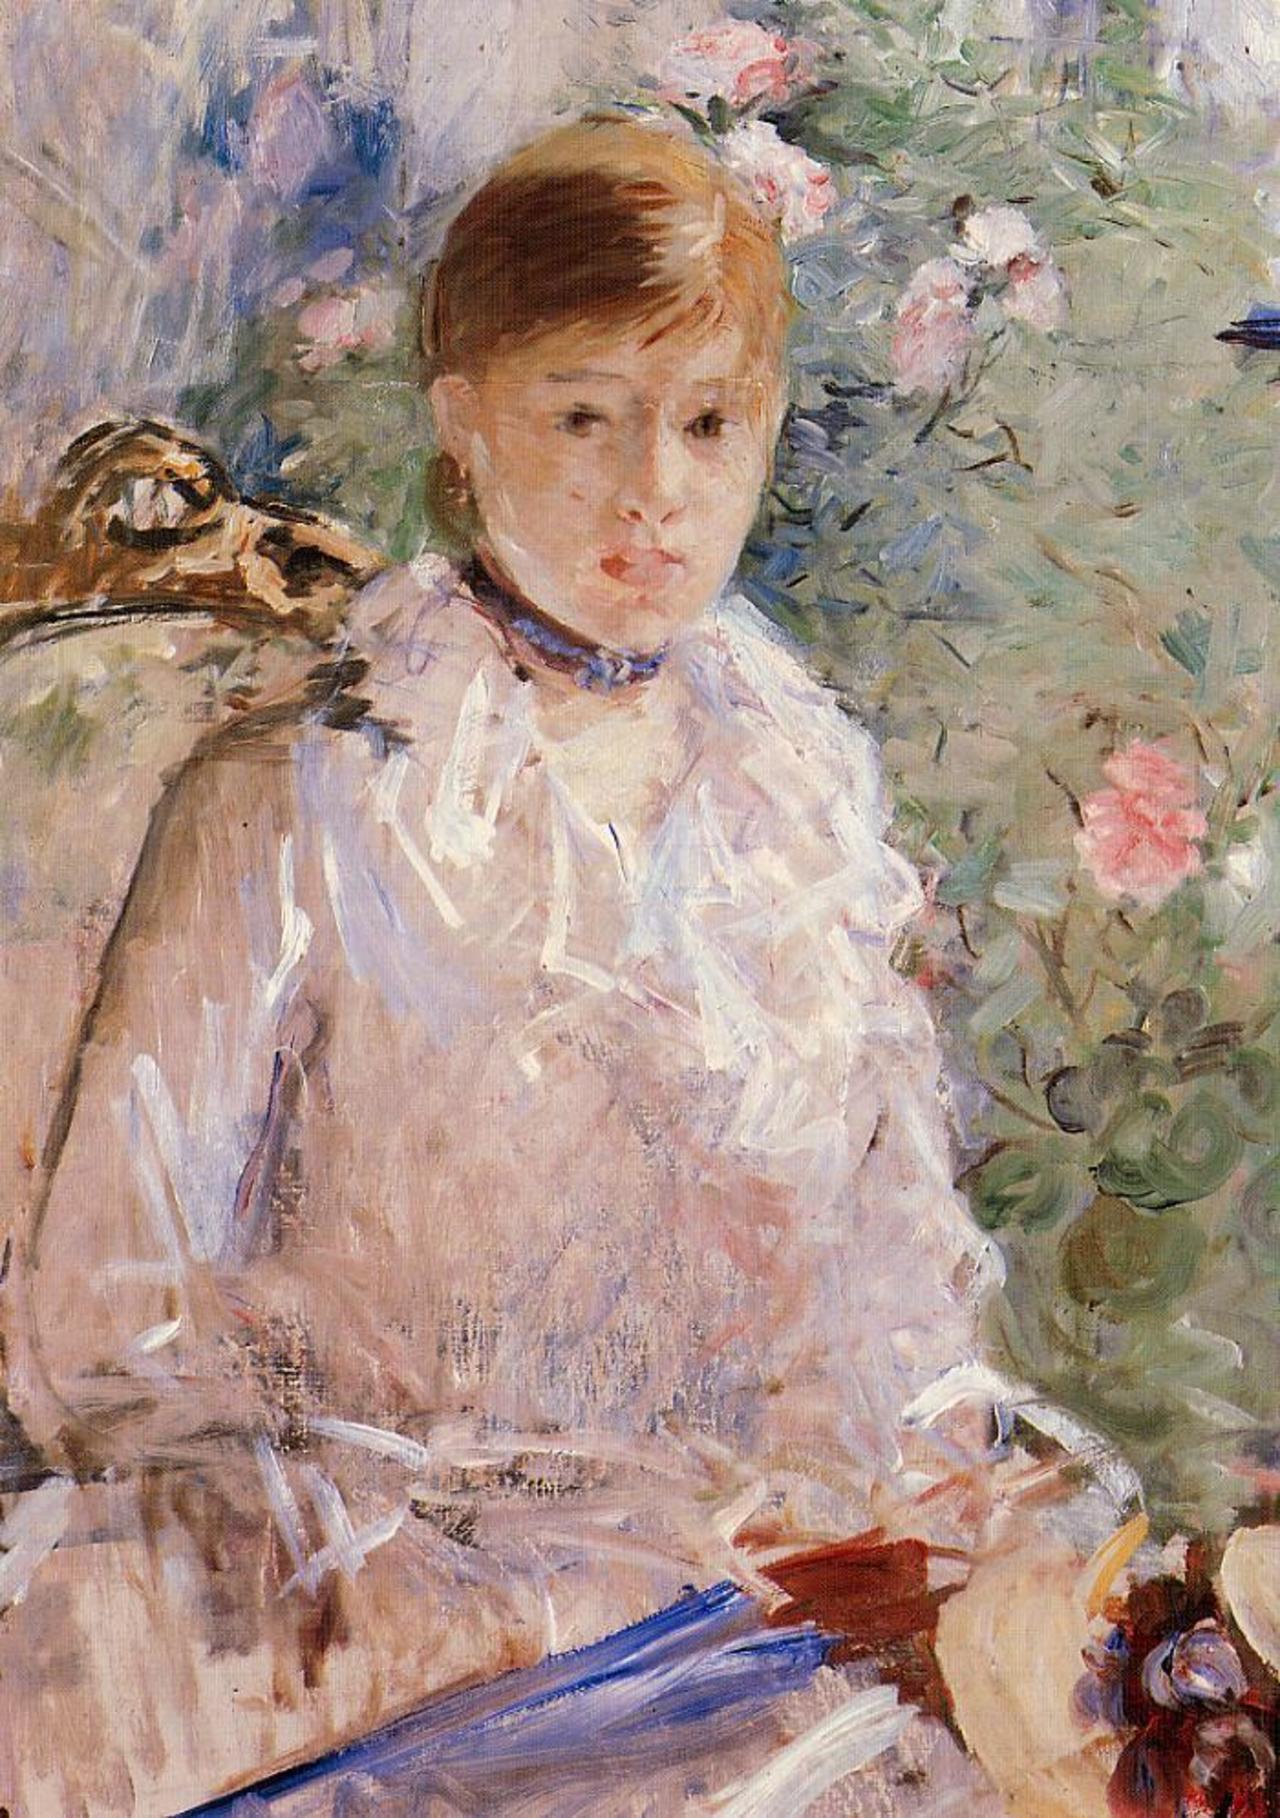 Portrait of a Young Lady #impressionism #frenchart https://t.co/bGkhuj94Gn